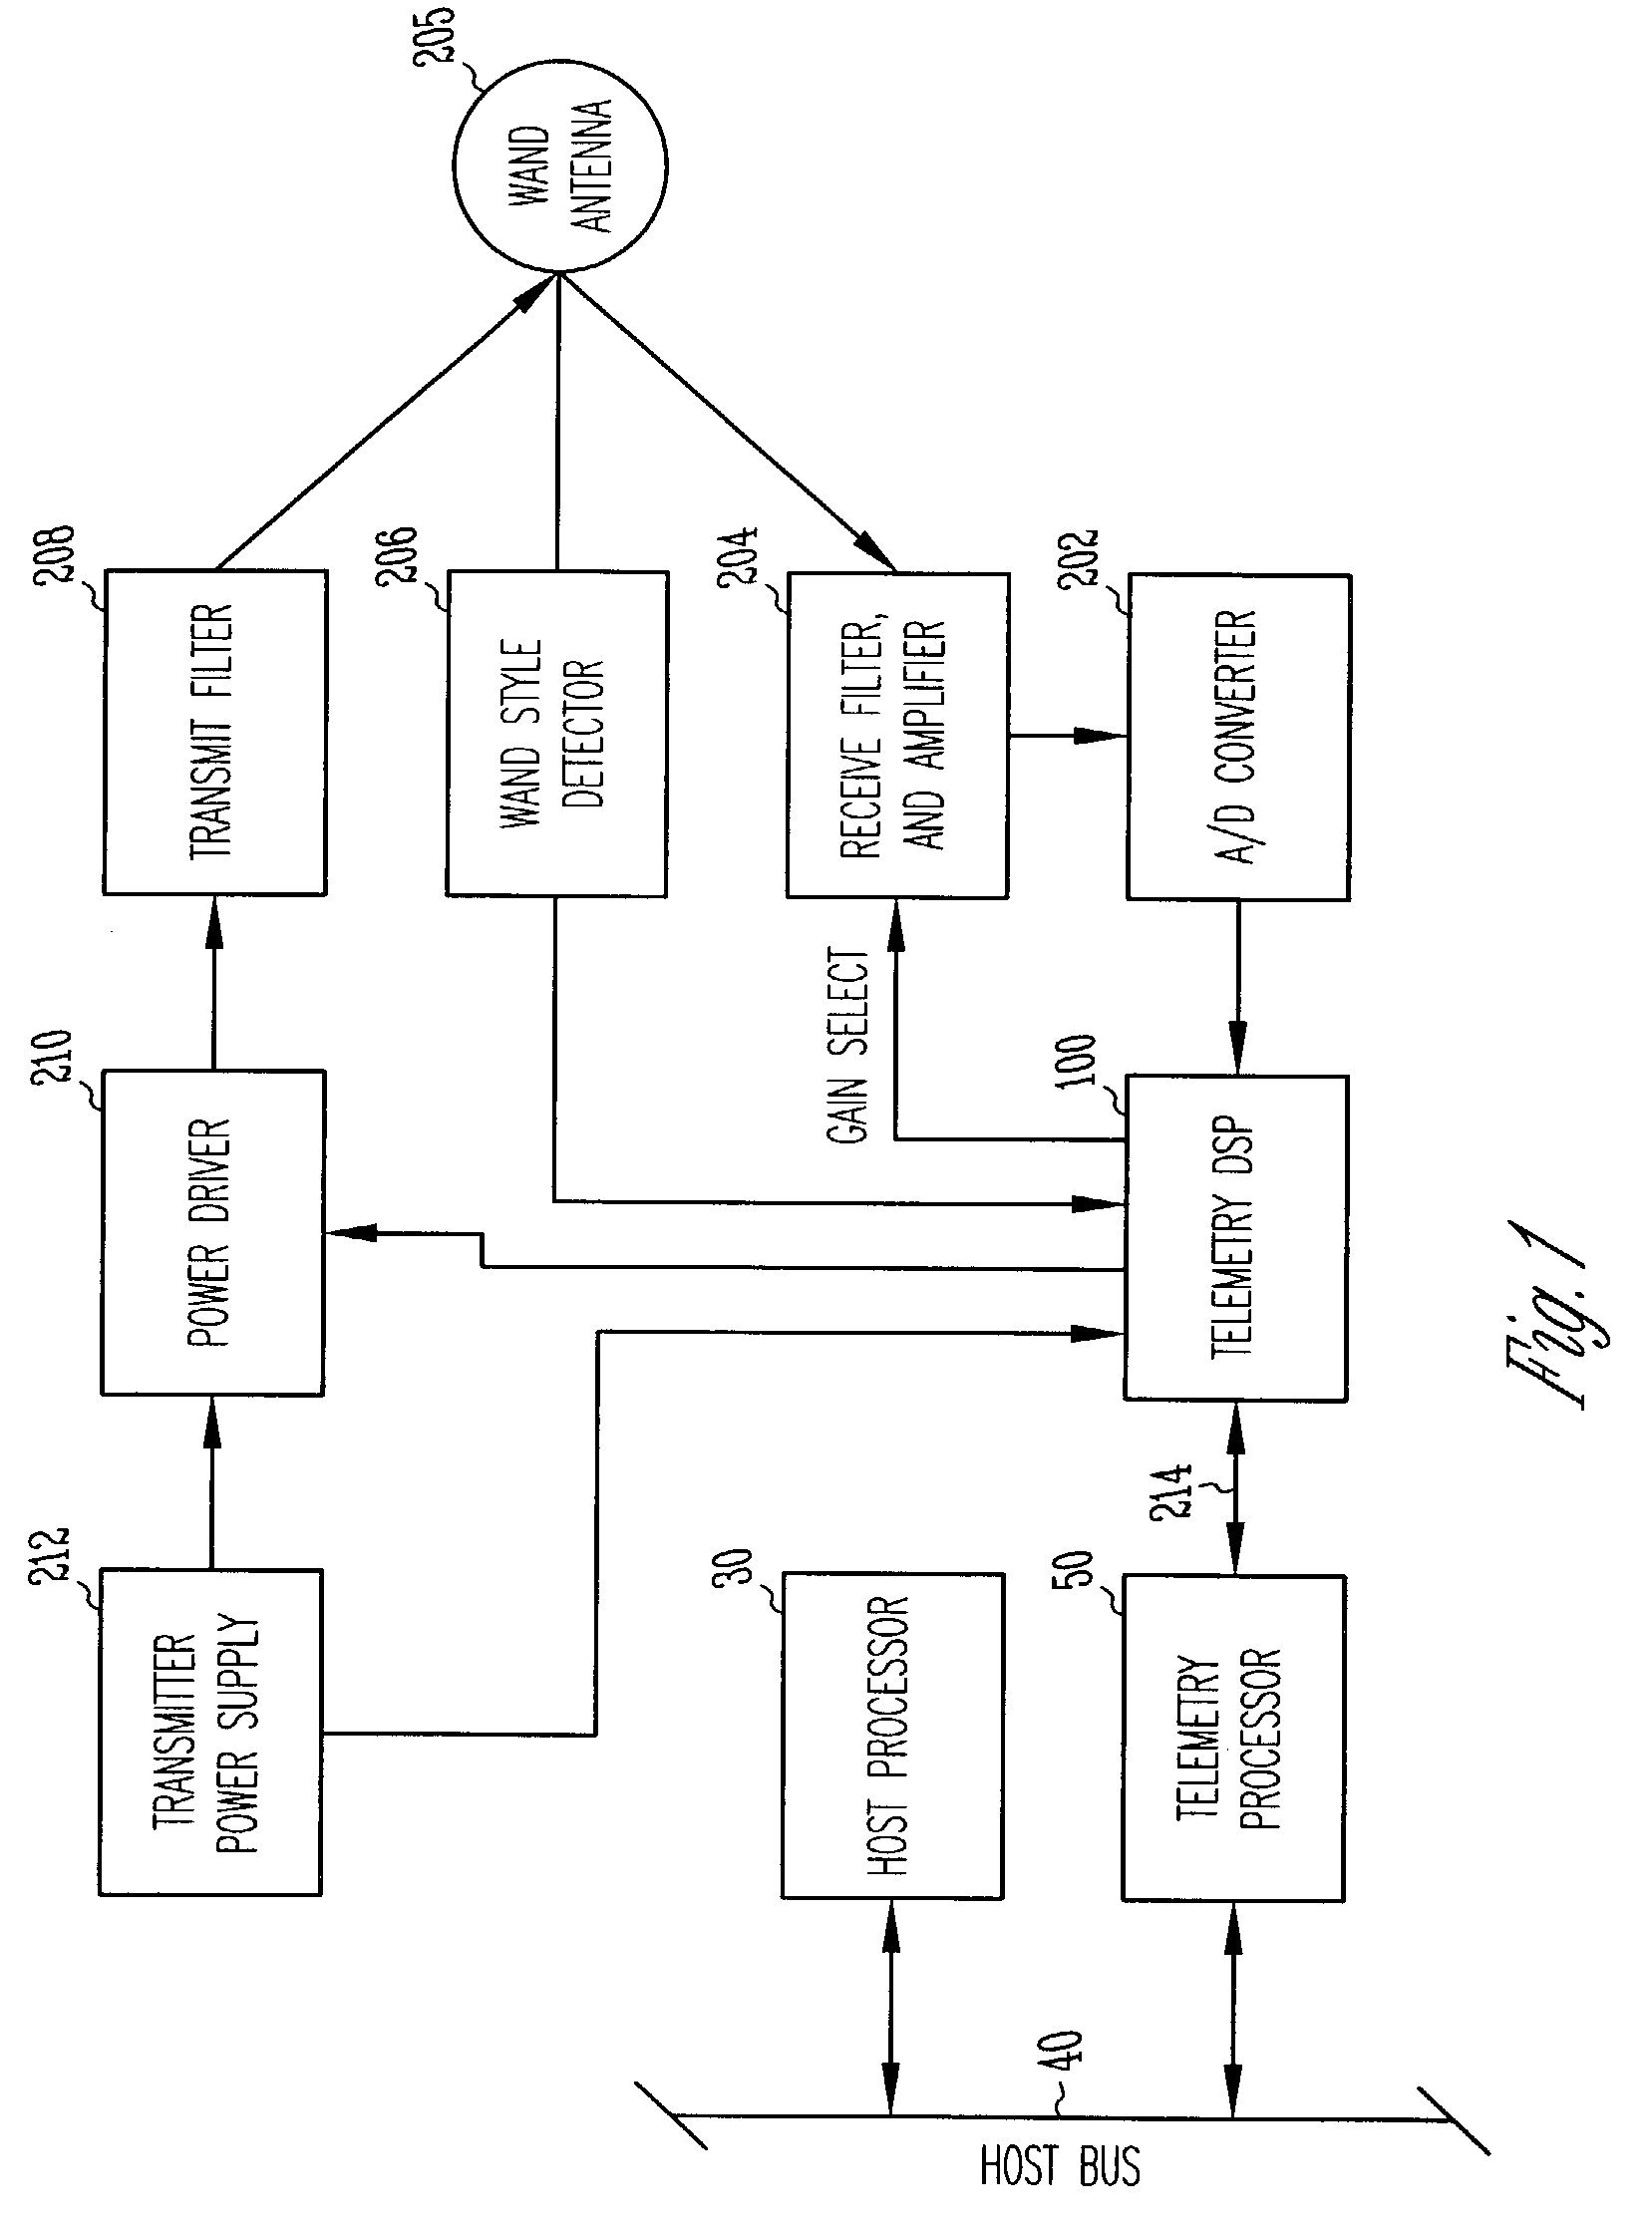 System and method for receiving telemetry data from an implantable medical device